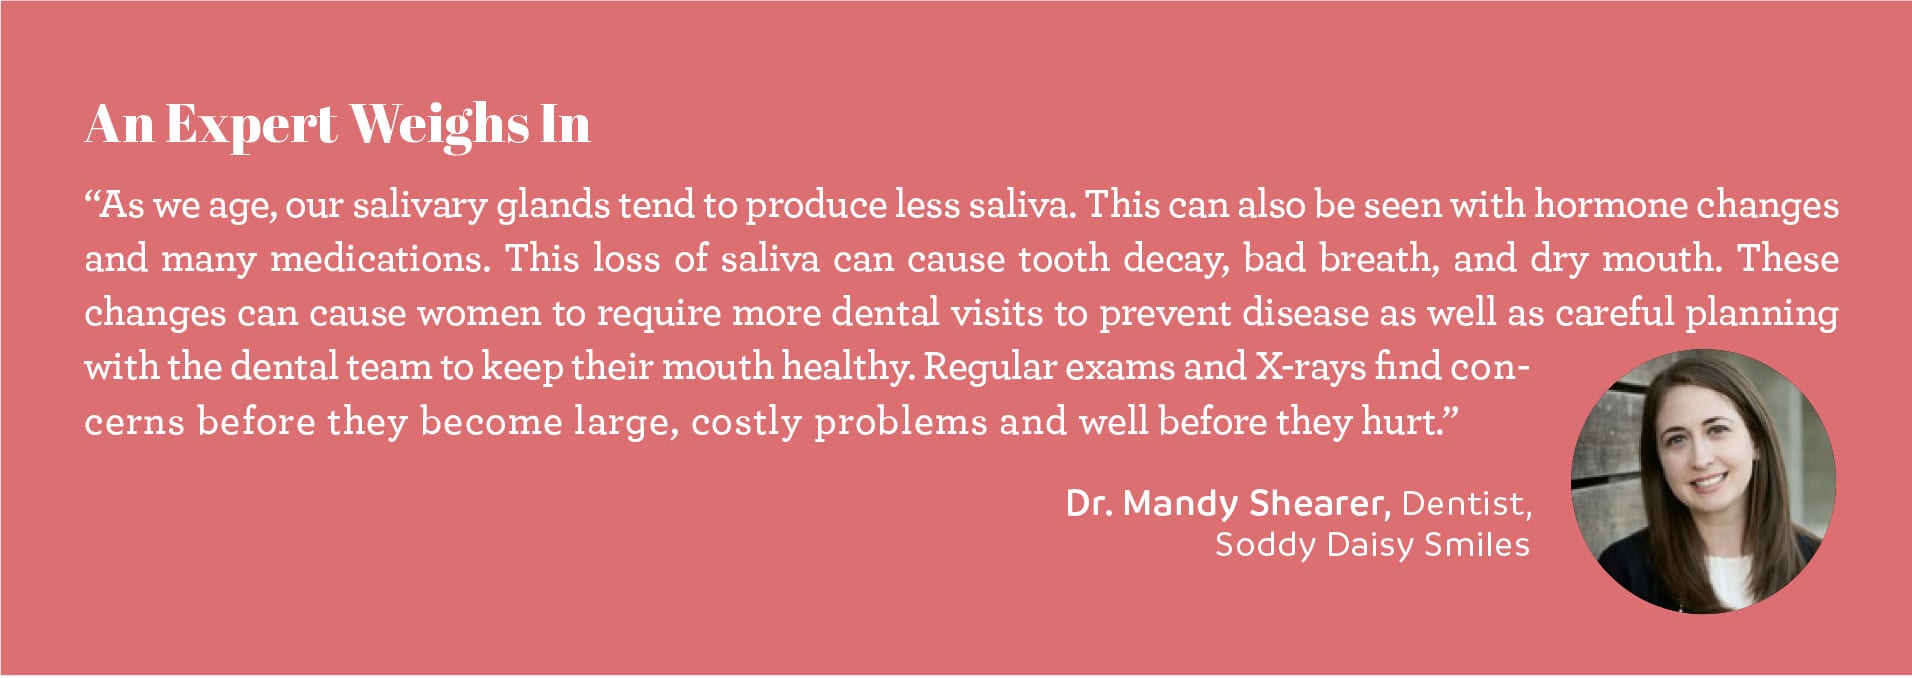 Expert opinion chattanooga soddy daisy smiles doctor mandy shearer dentist